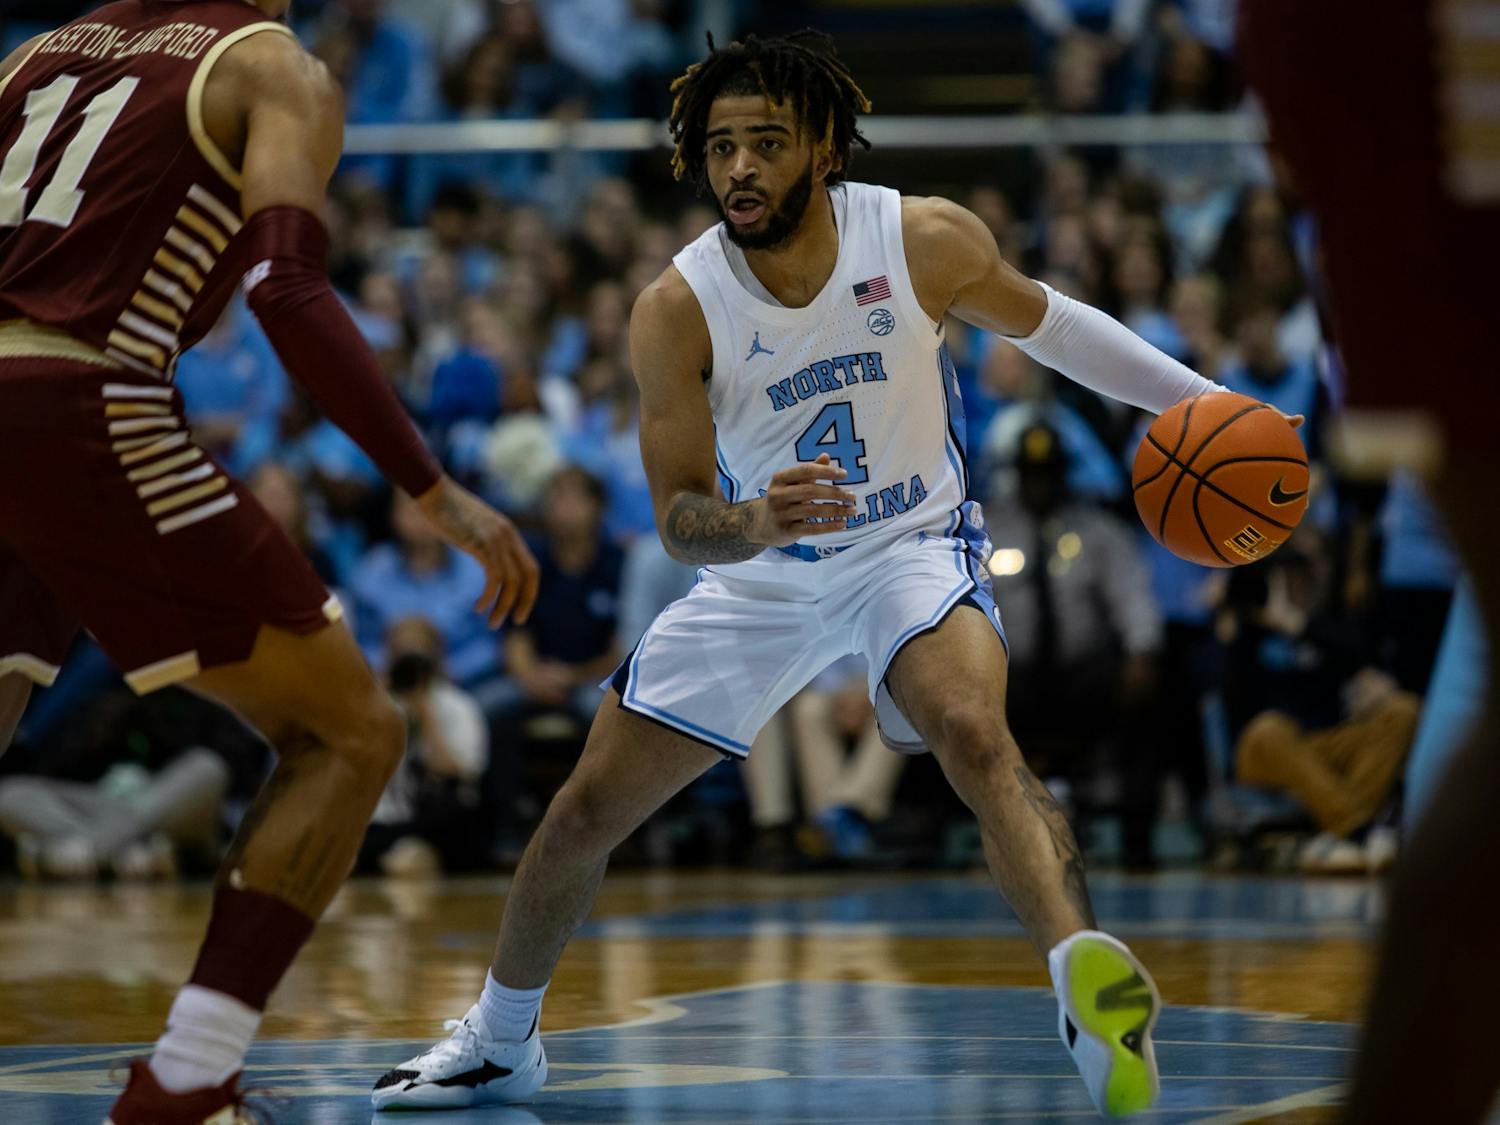 UNC junior guard RJ Davis (4) dribbles the ball during the men's basketball game against Boston College on Tuesday, Jan. 17, 2022, at the Dean Smith Center. UNC beat Boston College 72-64.